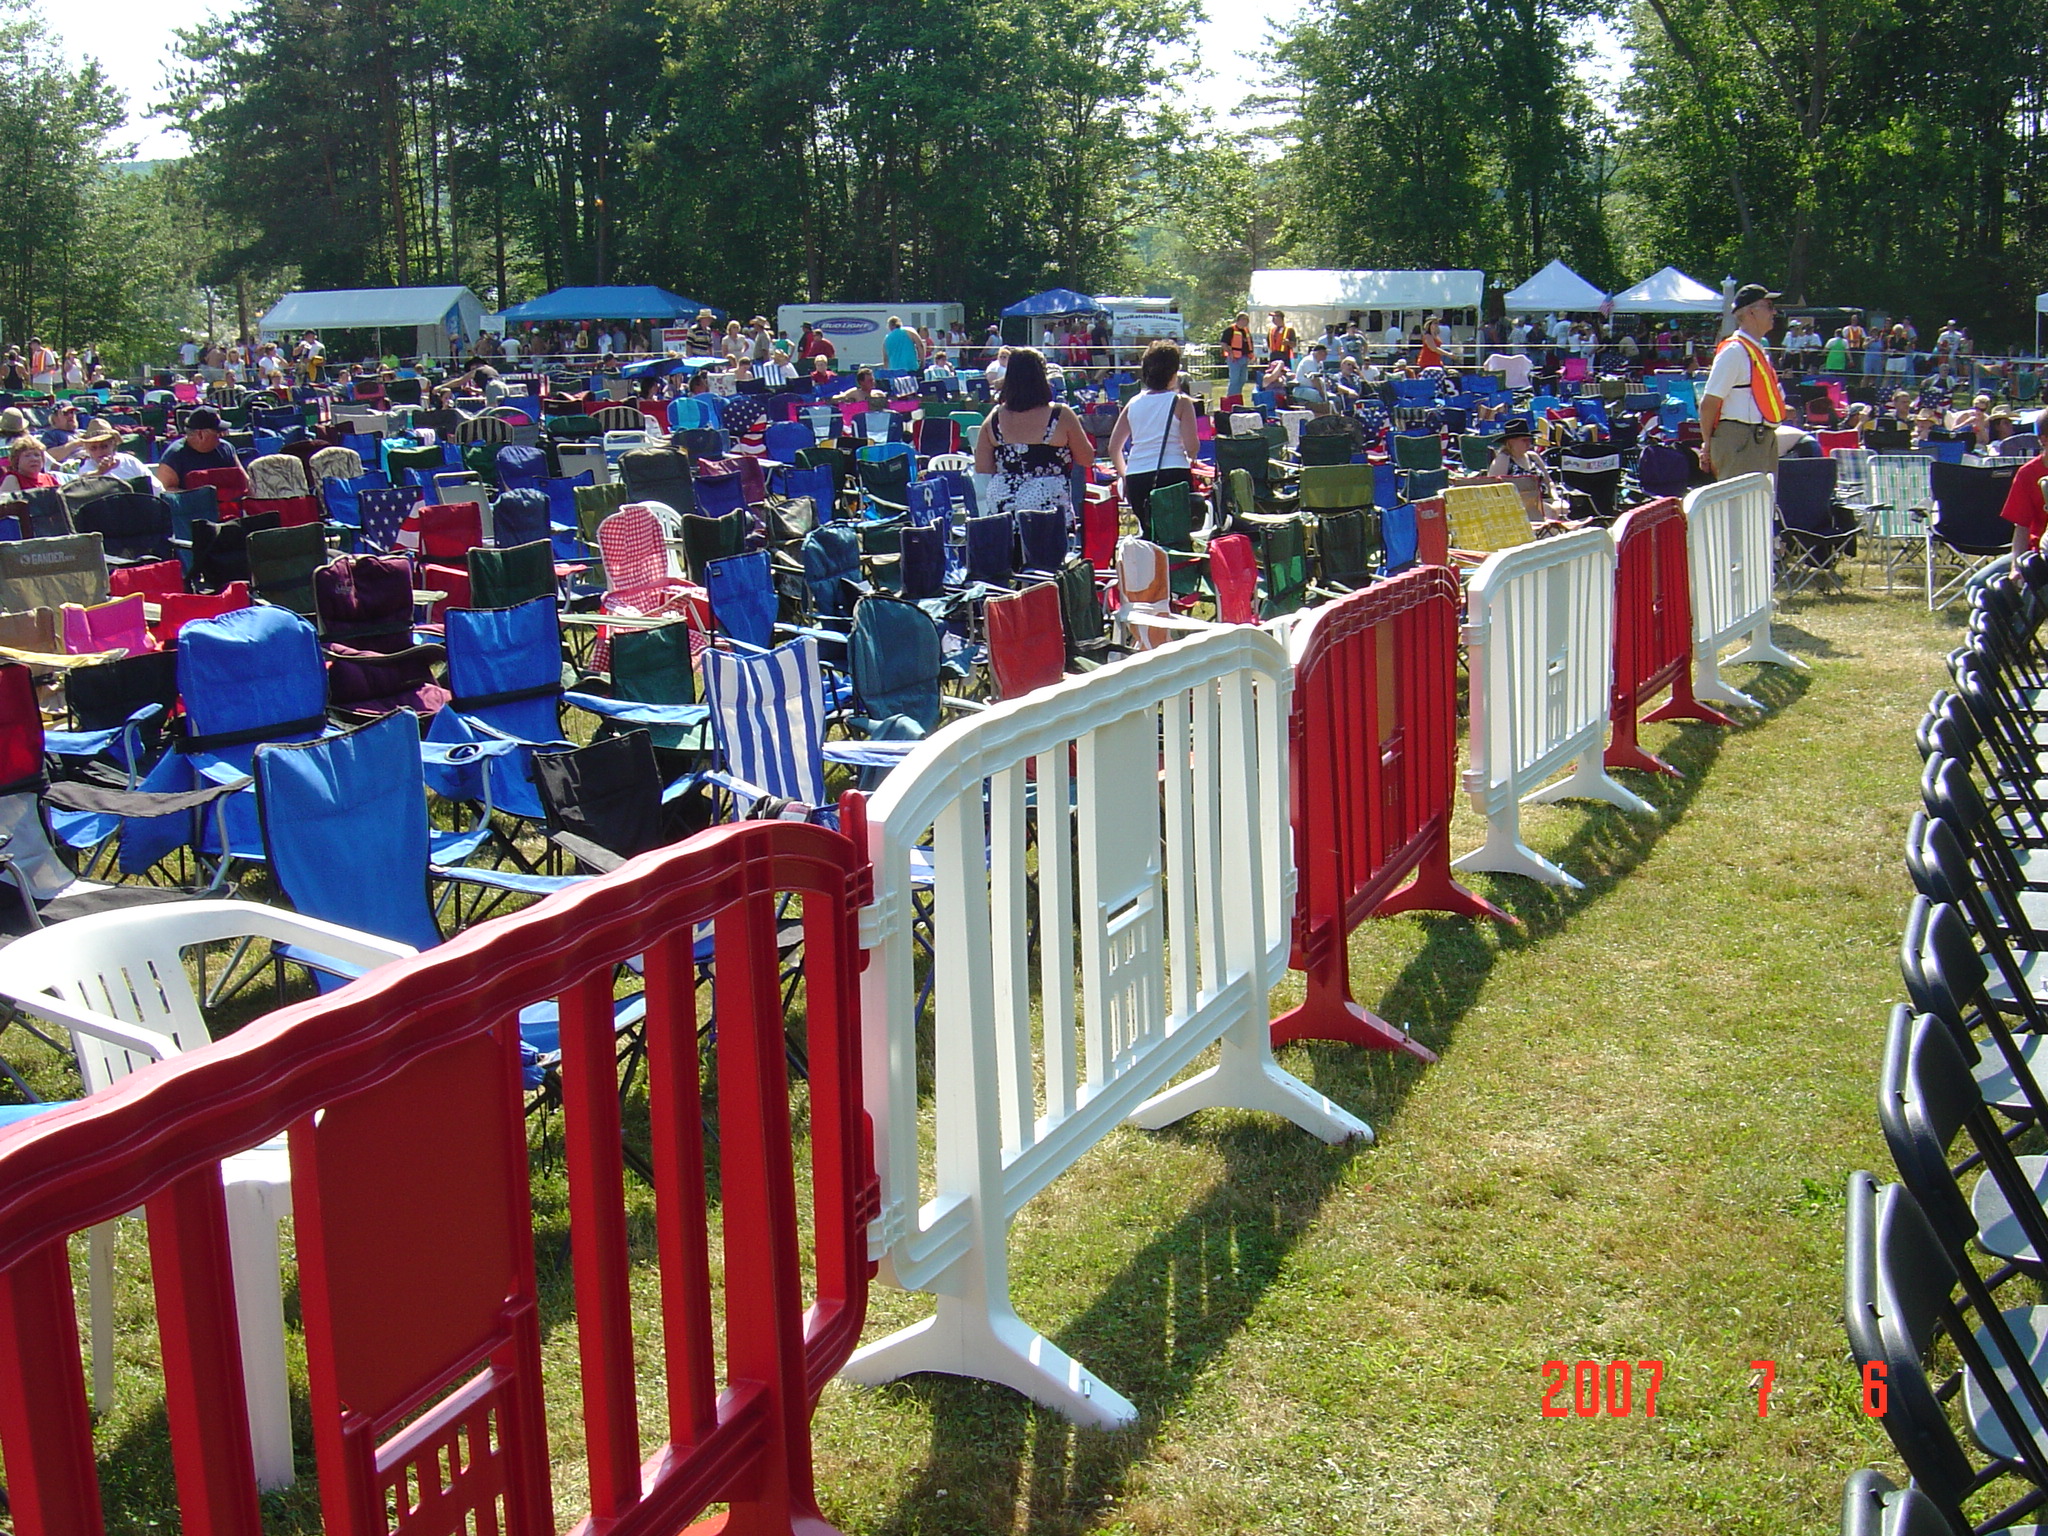 Movit Barricades at a Concert in New York